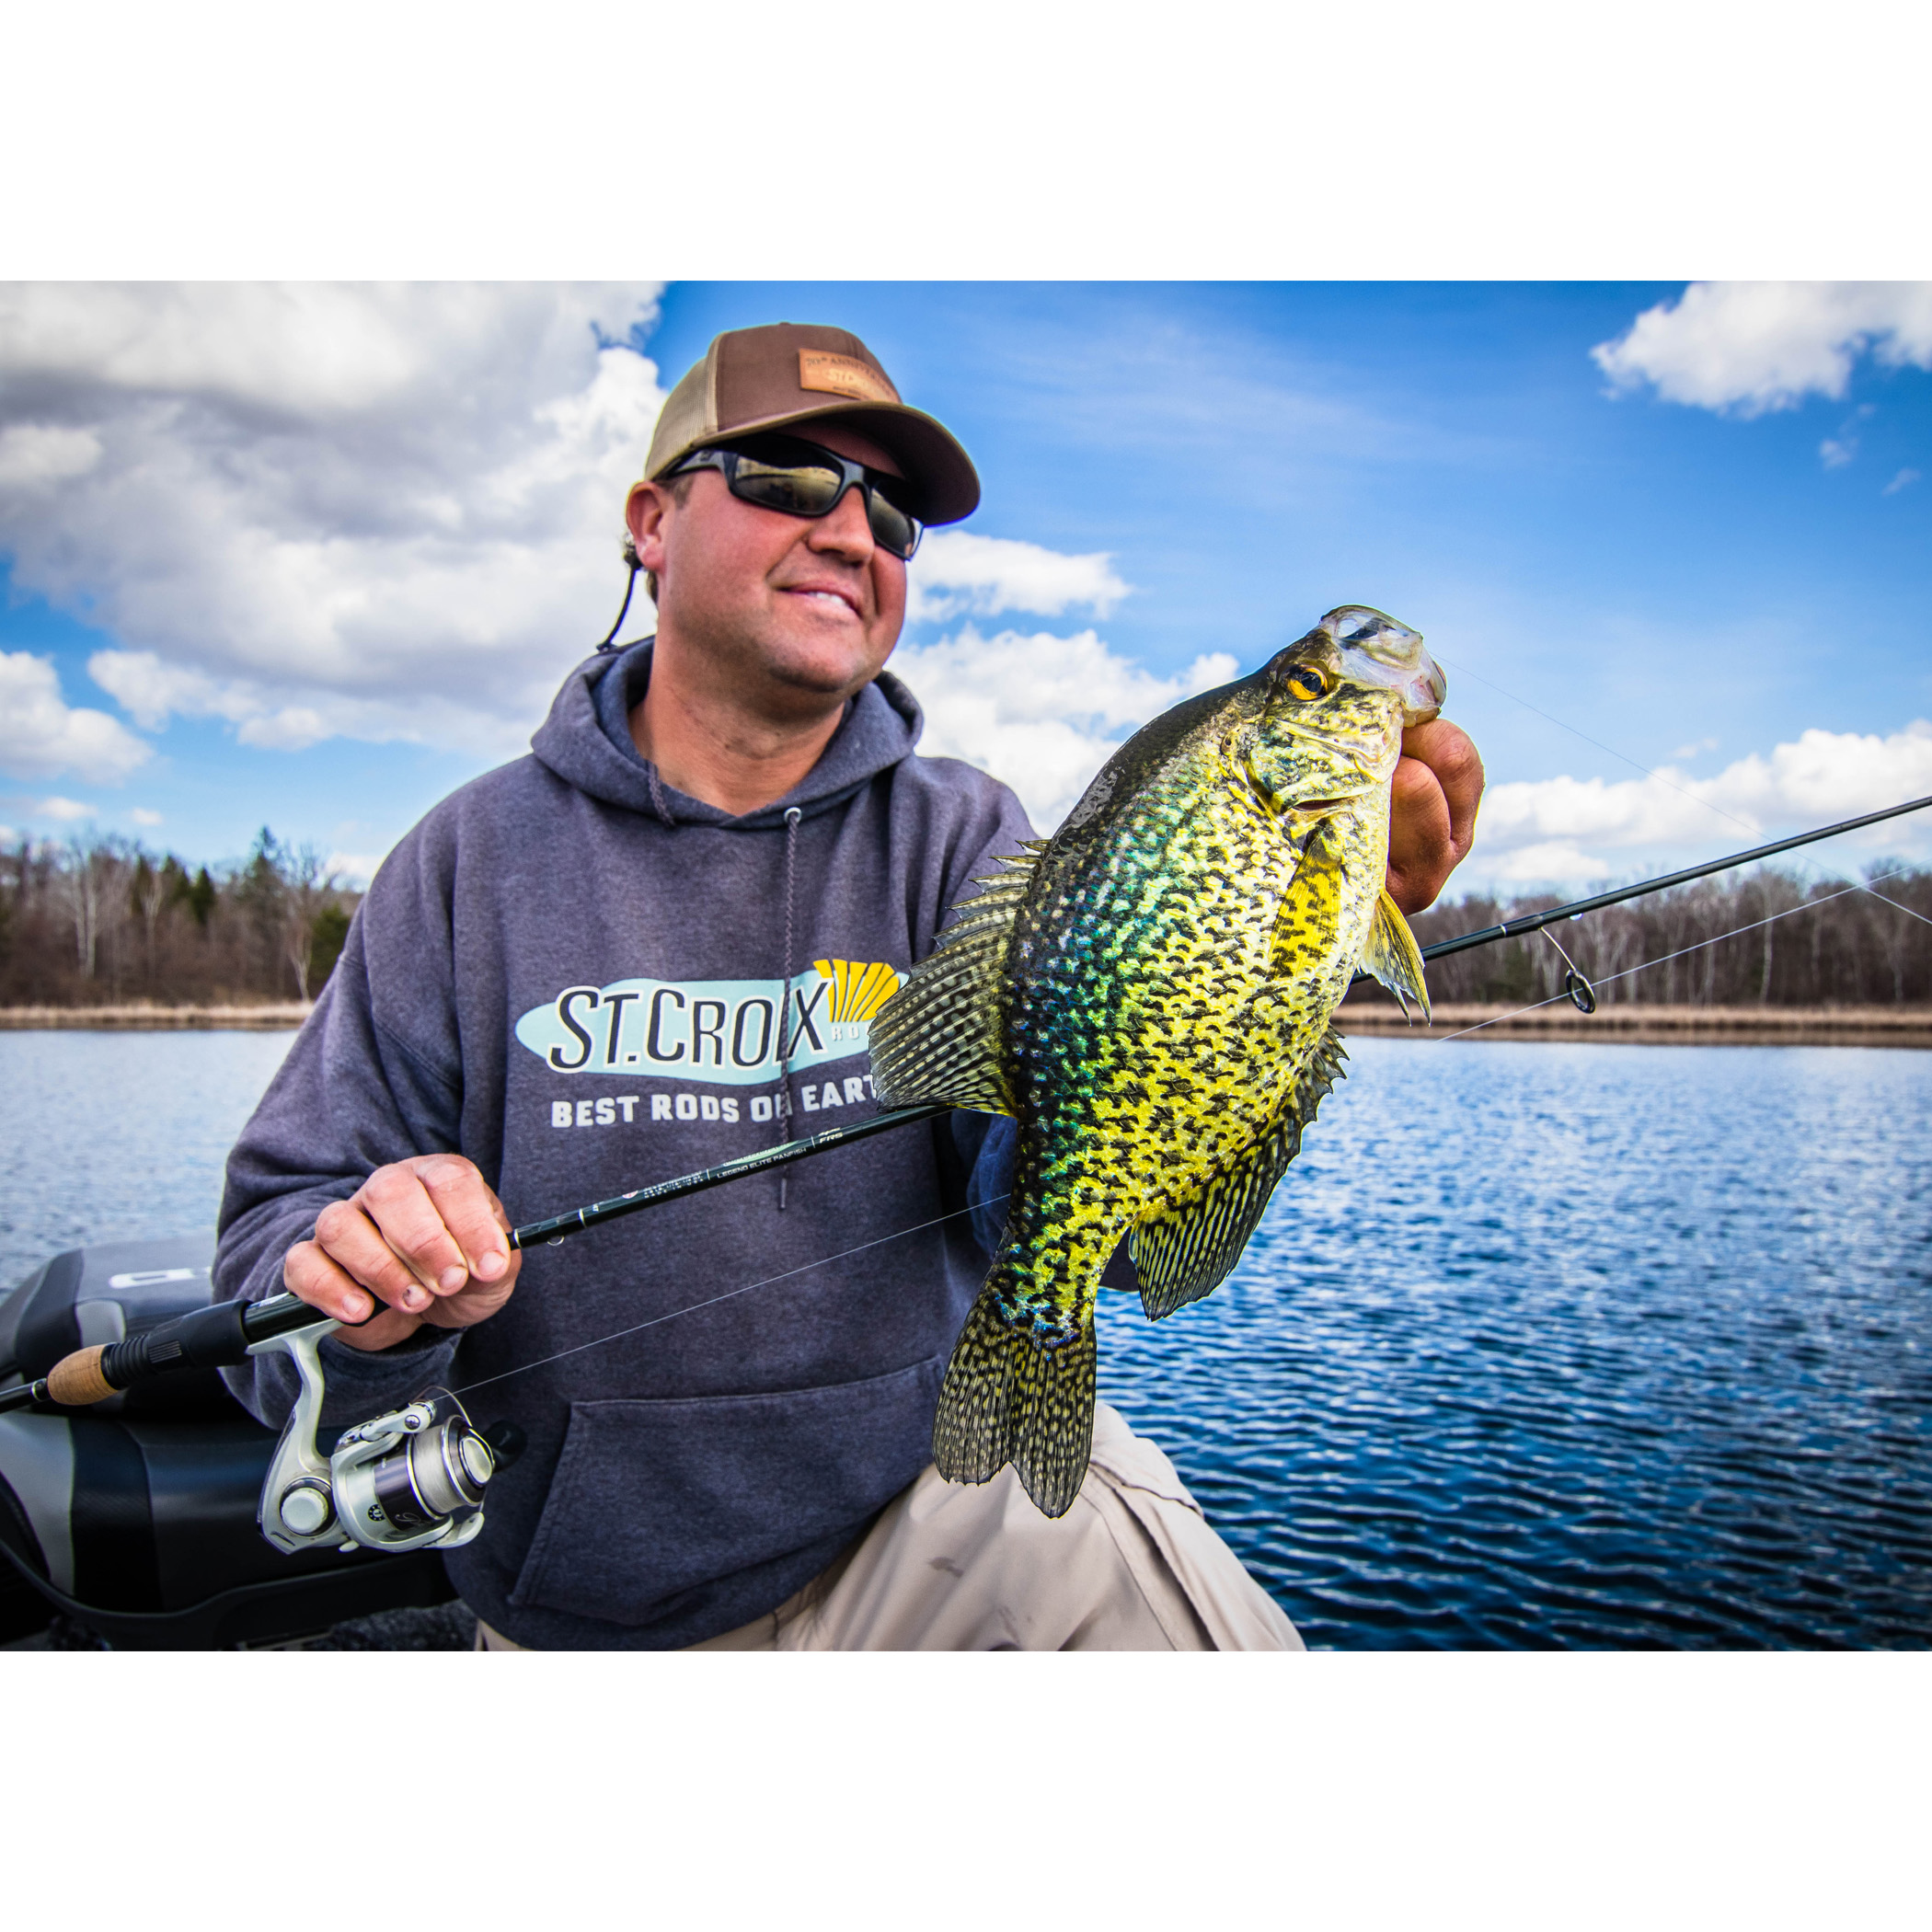 Better Than Live Bait? The Big Bite Crappie Thumper